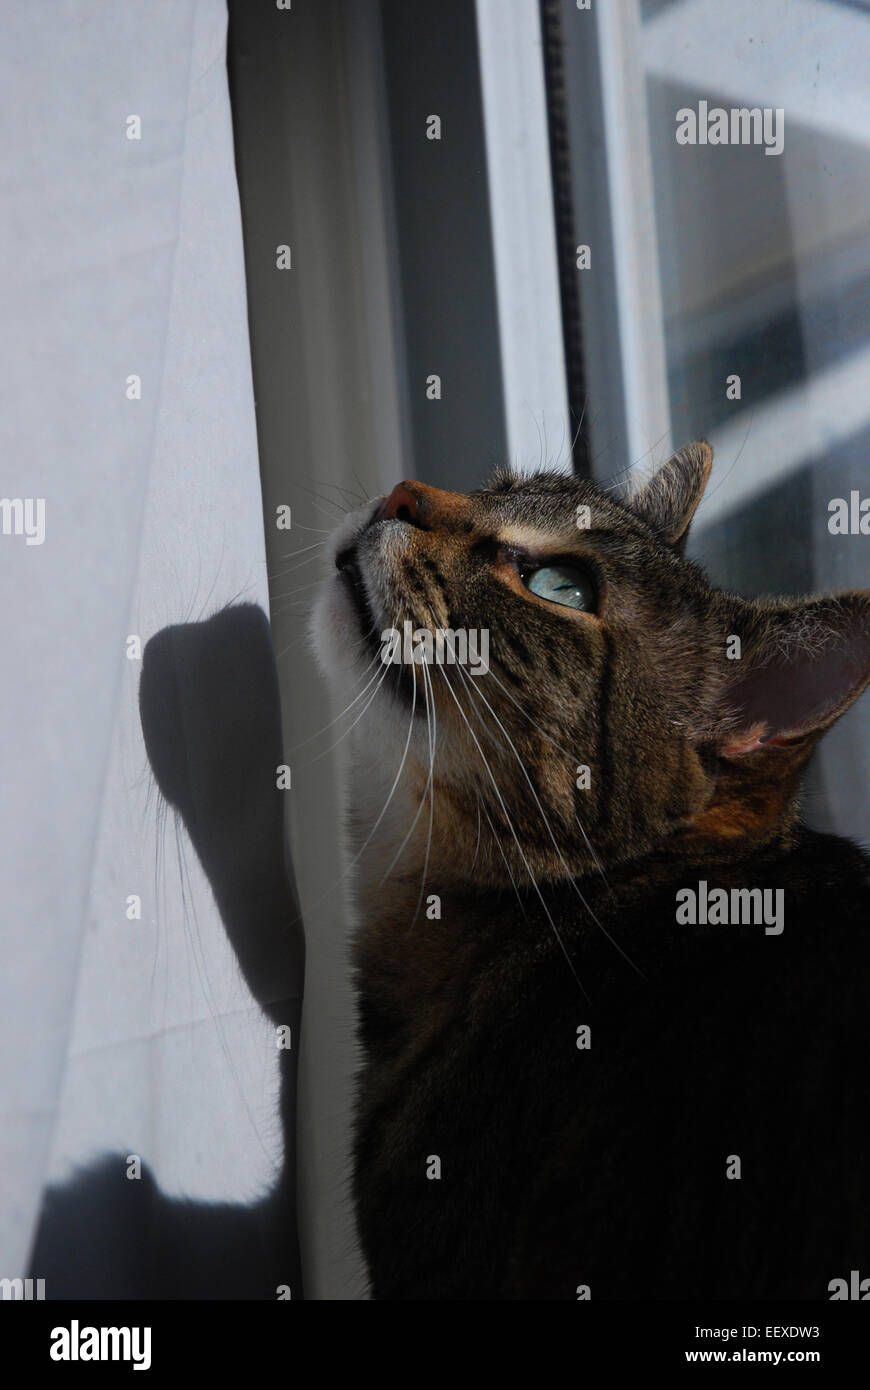 Tabby cat with green eyes in window looking up Stock Photo